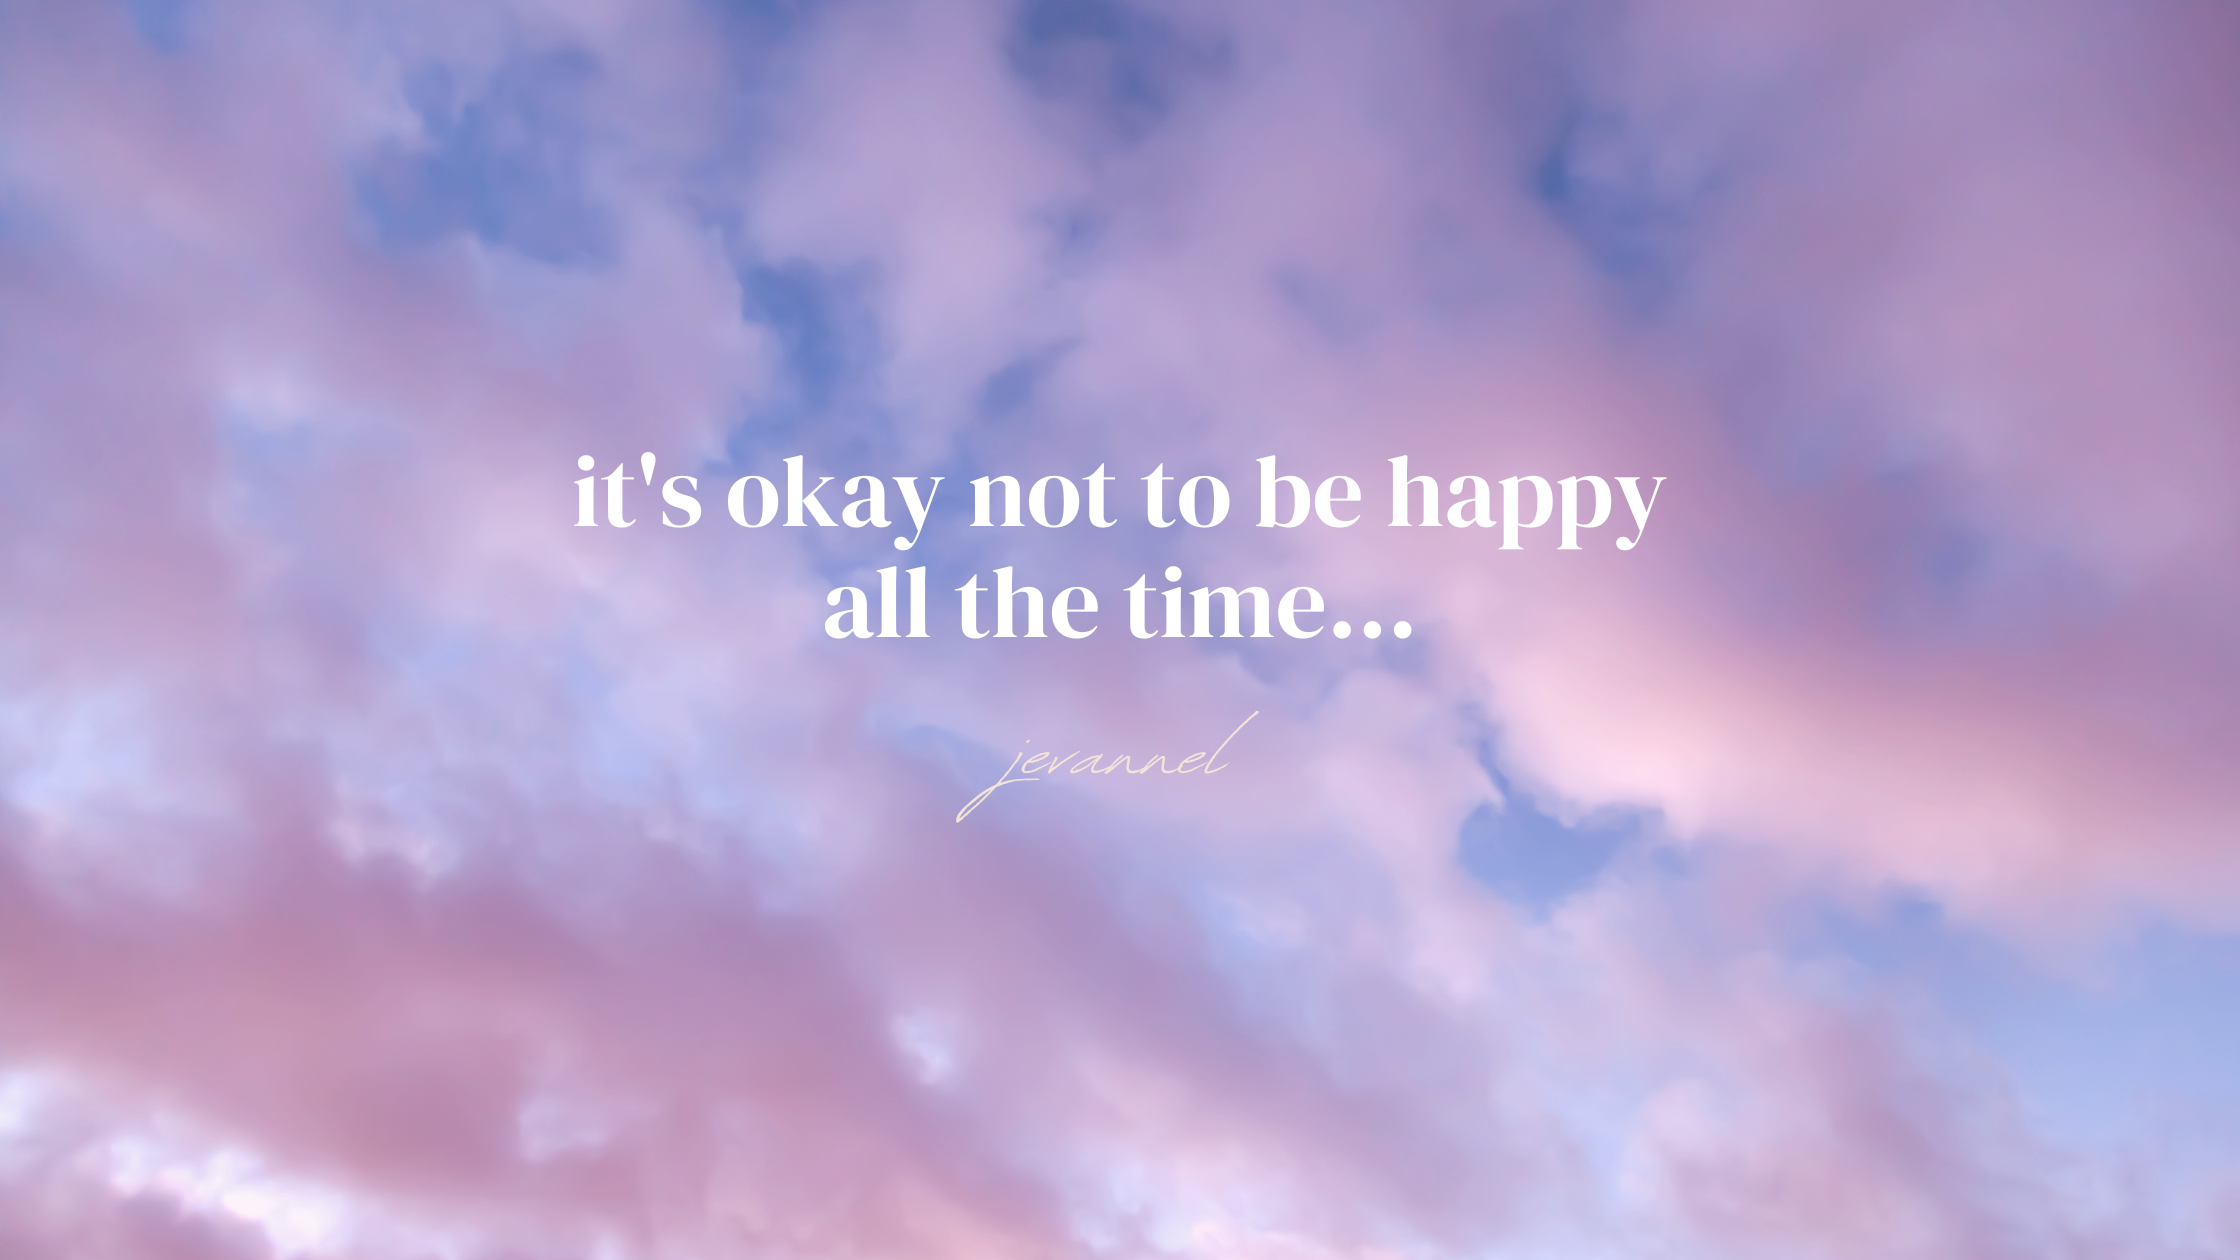 Be OK About Not Being OK